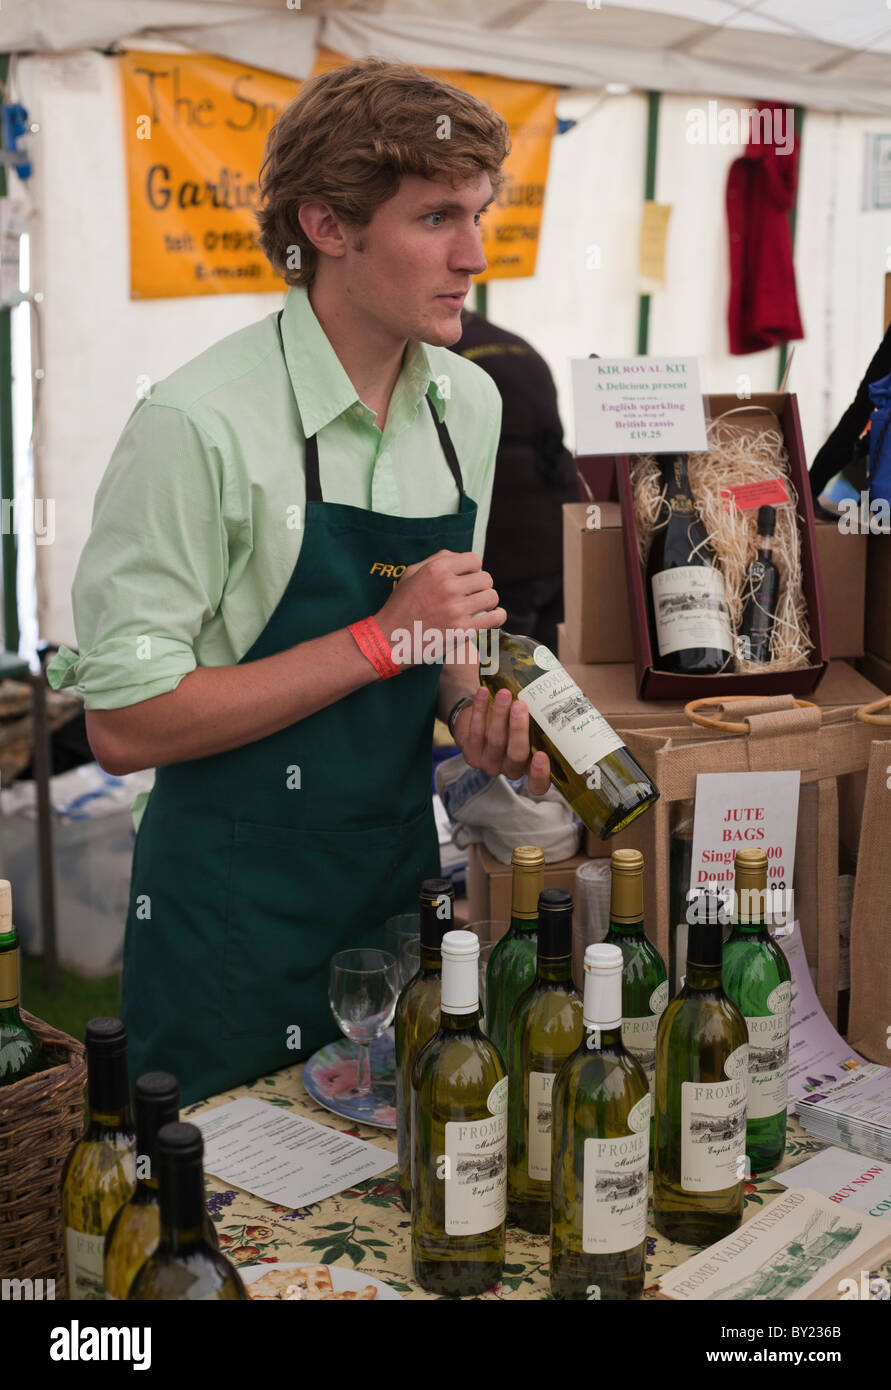 England, Shropshire, Ludlow.  A young man at the Ludlow Food Festival selling wine from the Frome Valley Vineyard. Stock Photo